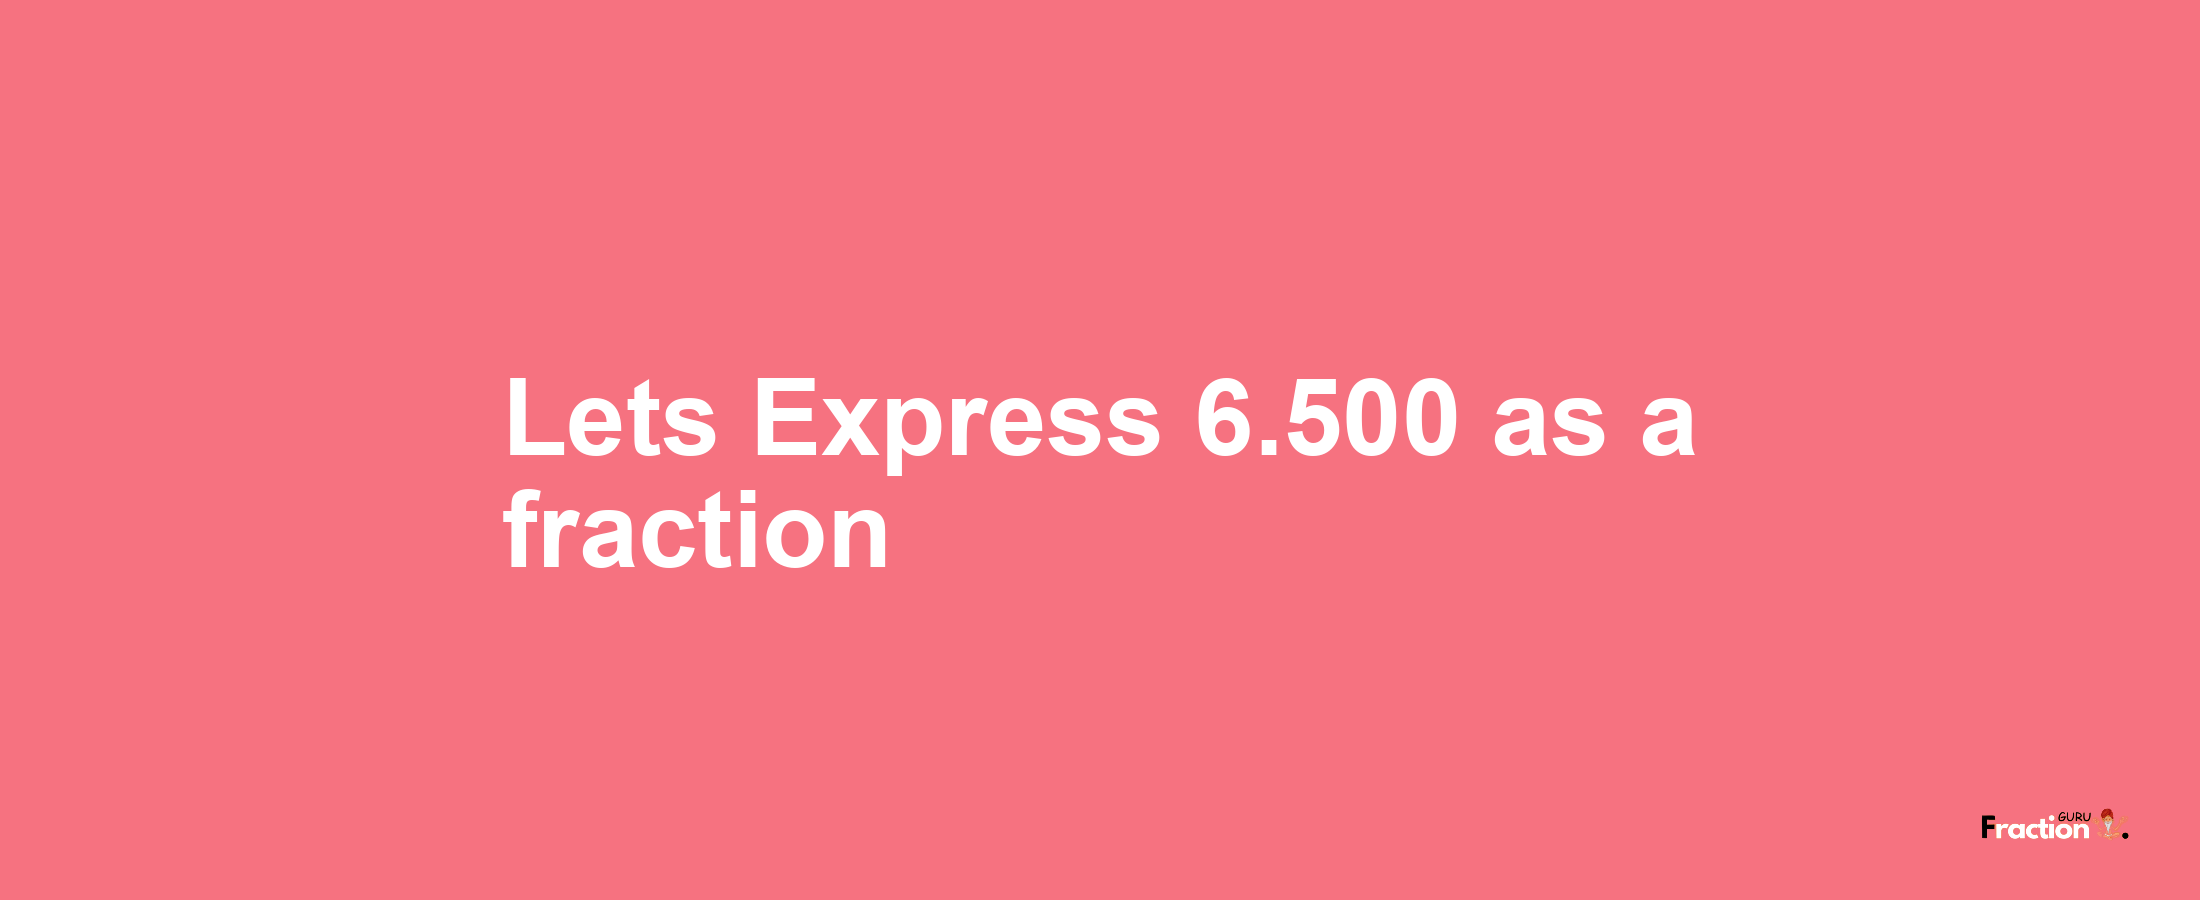 Lets Express 6.500 as afraction